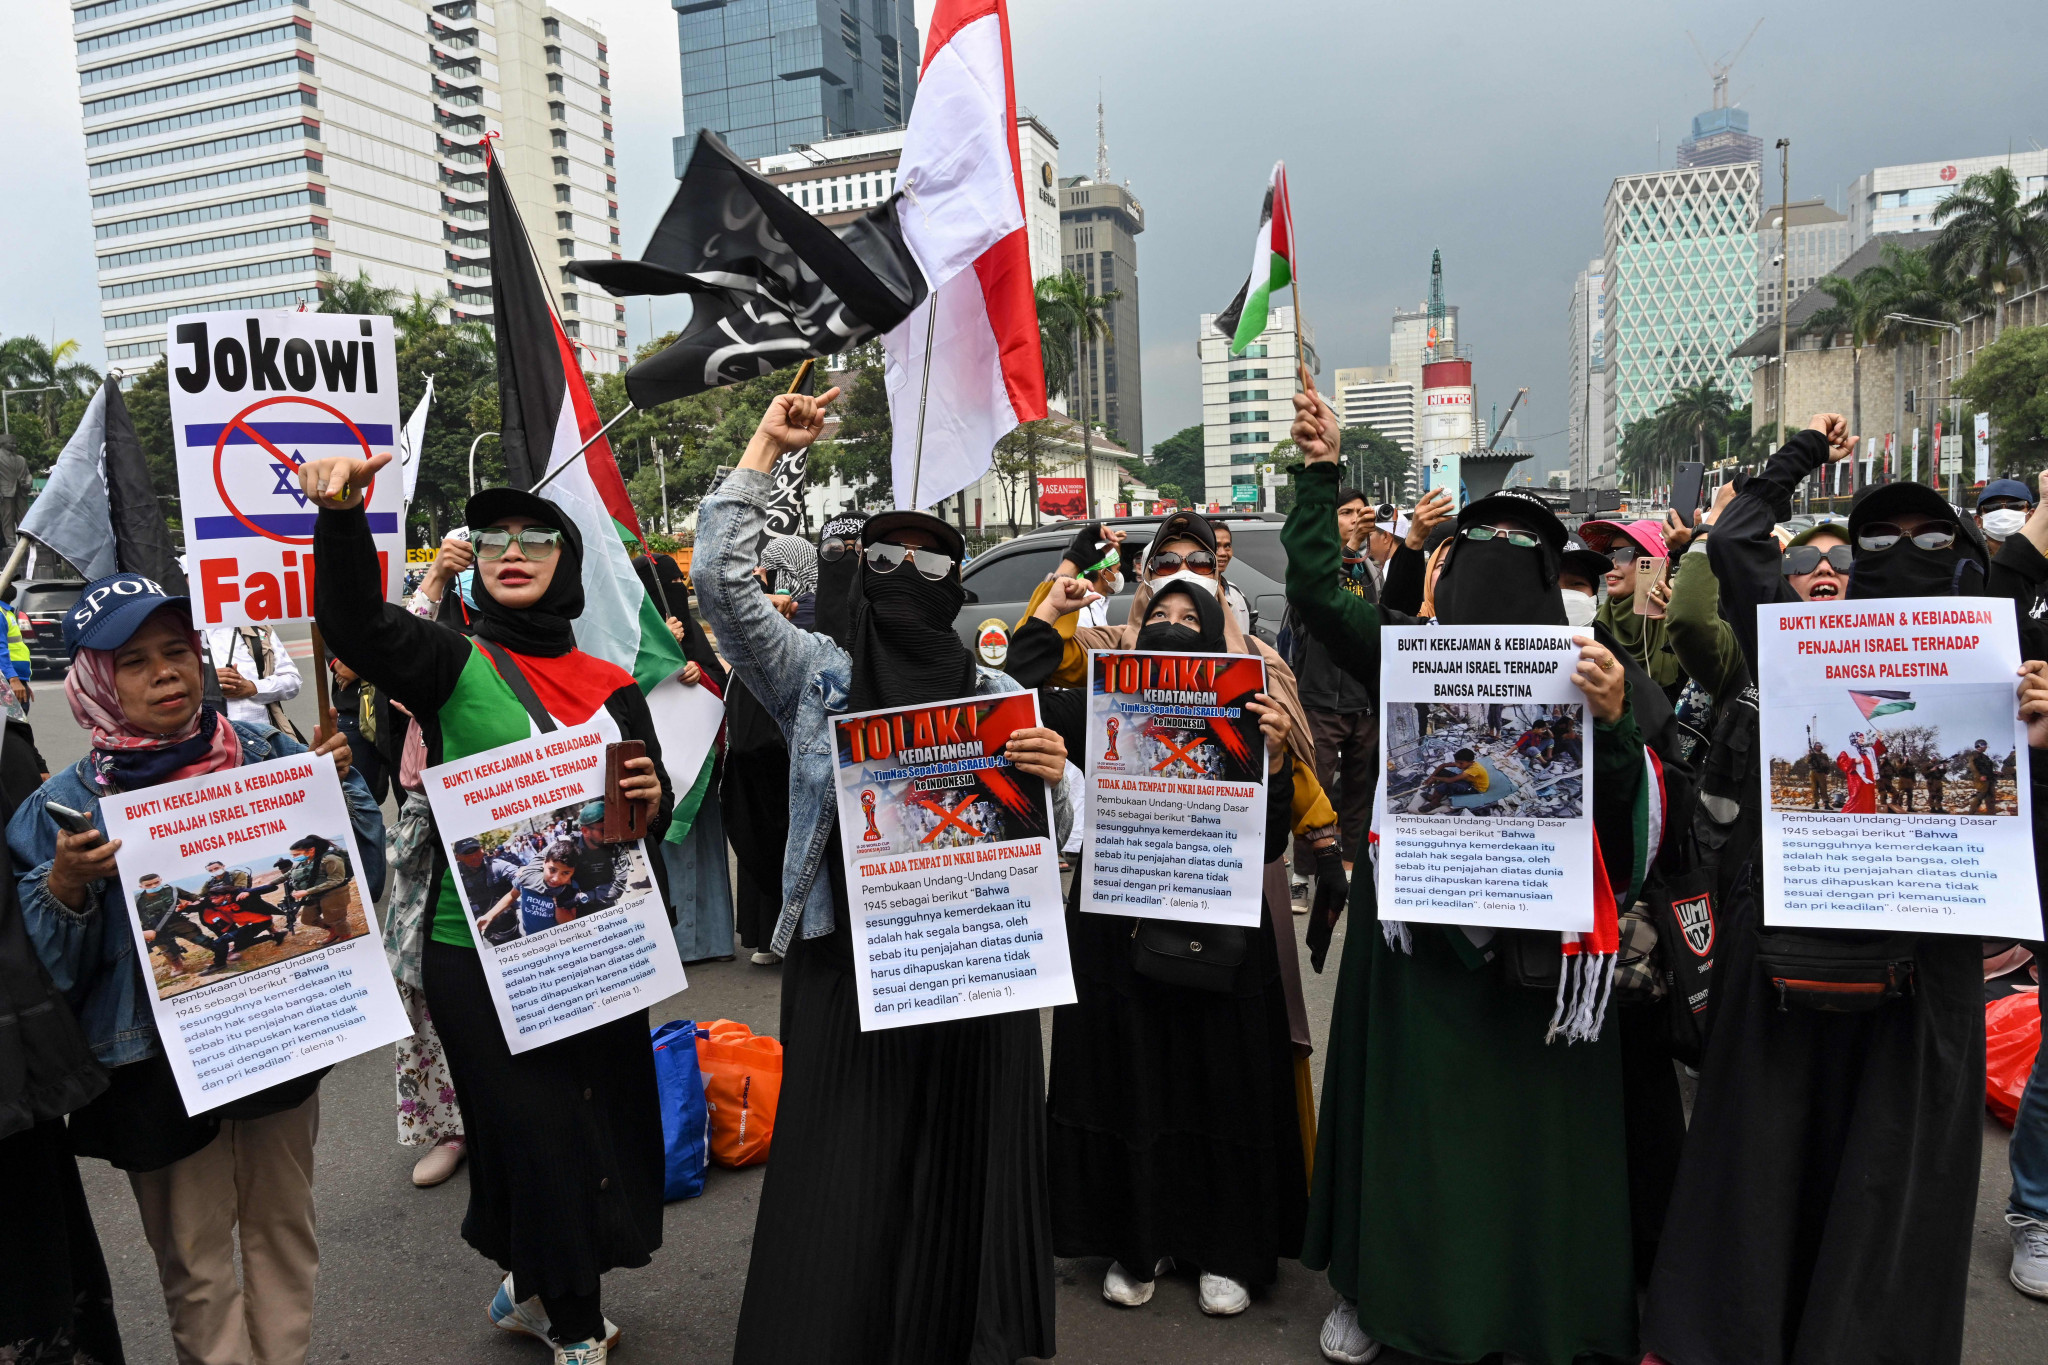 Islamic groups had protested in Indonesia, the world's most populous Muslim-majority nation, about the participation of Israel in the FIFA Under-20 World Cup